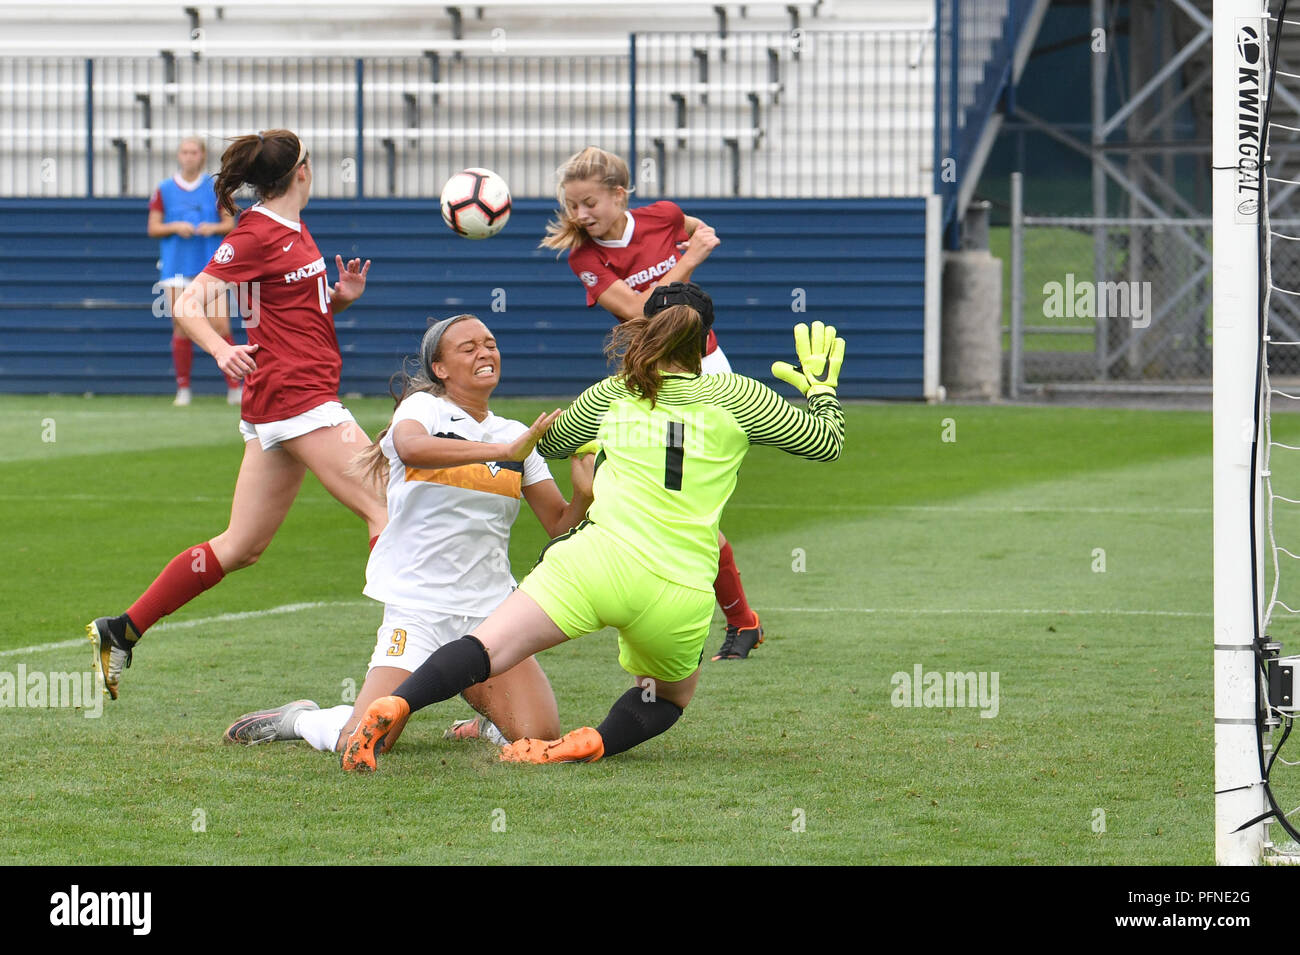 University Park, Pennsylvania, USA. 19th Aug, 2018. WVU women's soccer player LAUREN SEGALLA (9) collides with Arkansas women's soccer player RACHEL HARRIS (1) during the NCAA women's soccer match played at Jeffrey Field in University Park, PA. WVU and Arkansas finished in a 1-1 draw after two overtimes. Credit: Ken Inness/ZUMA Wire/Alamy Live News Stock Photo